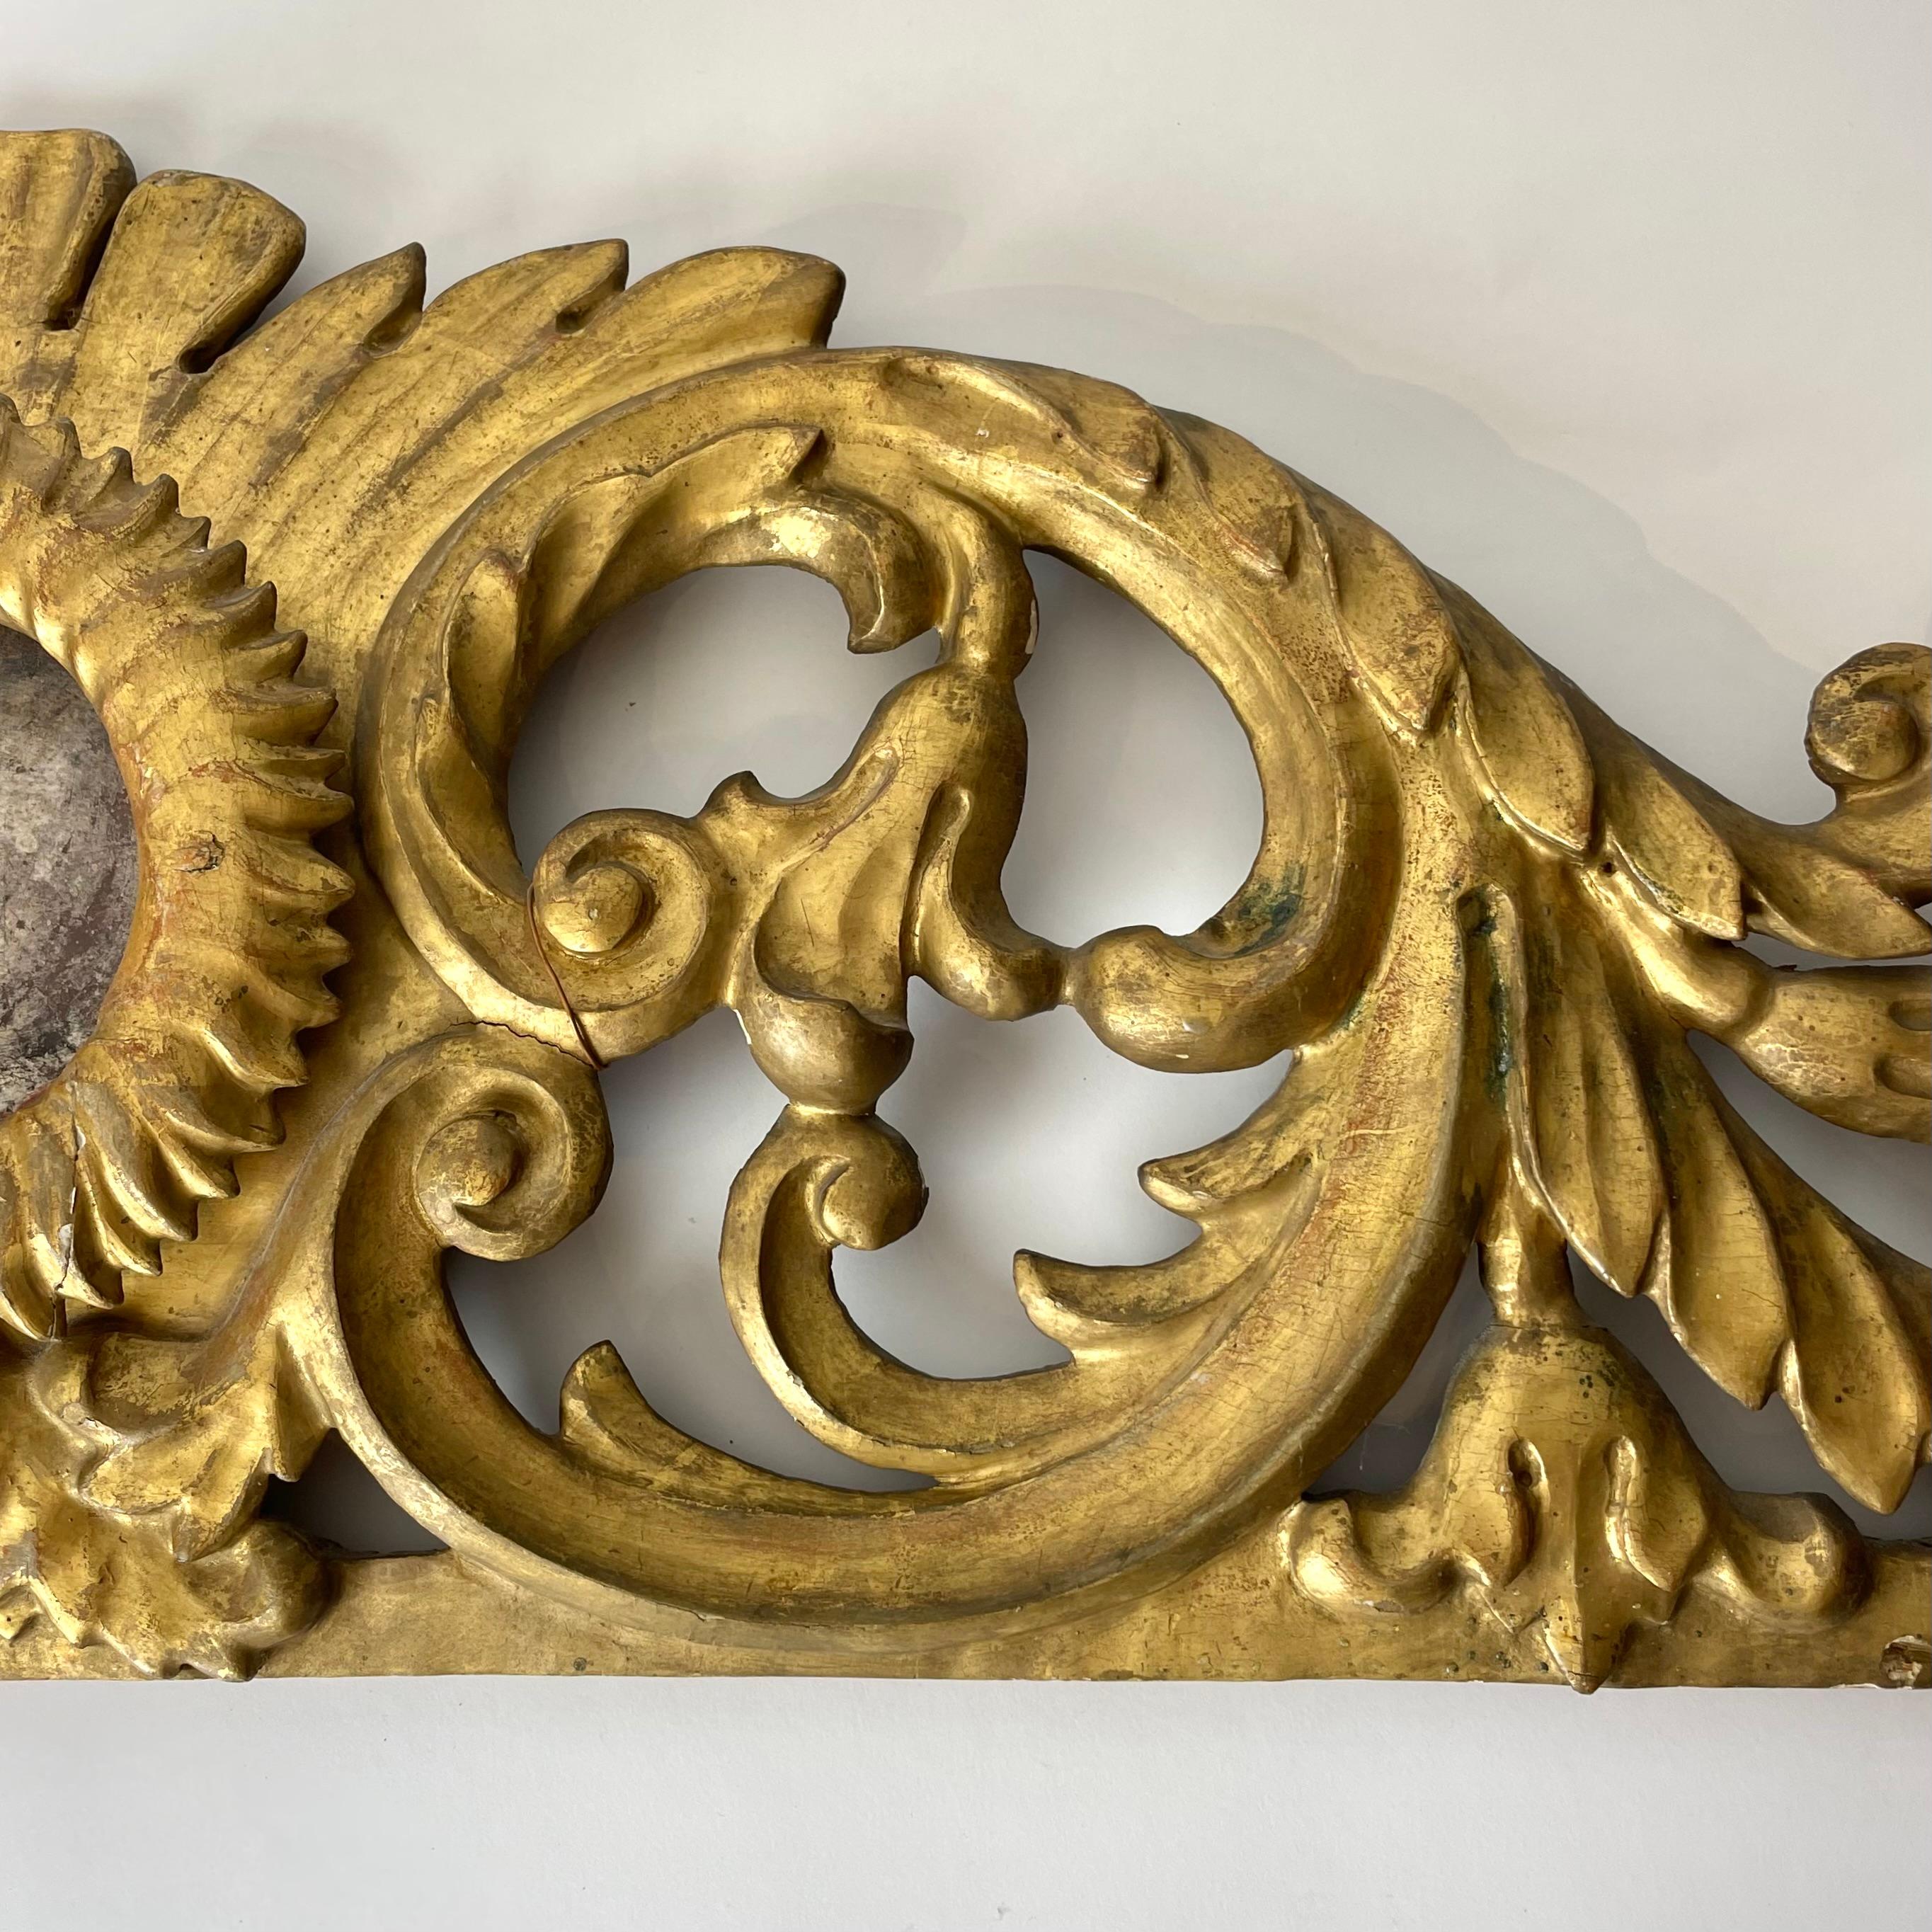 Decorative Door Moulding Architrave Gilt and Silvered Wood Panel, 18th Century For Sale 1